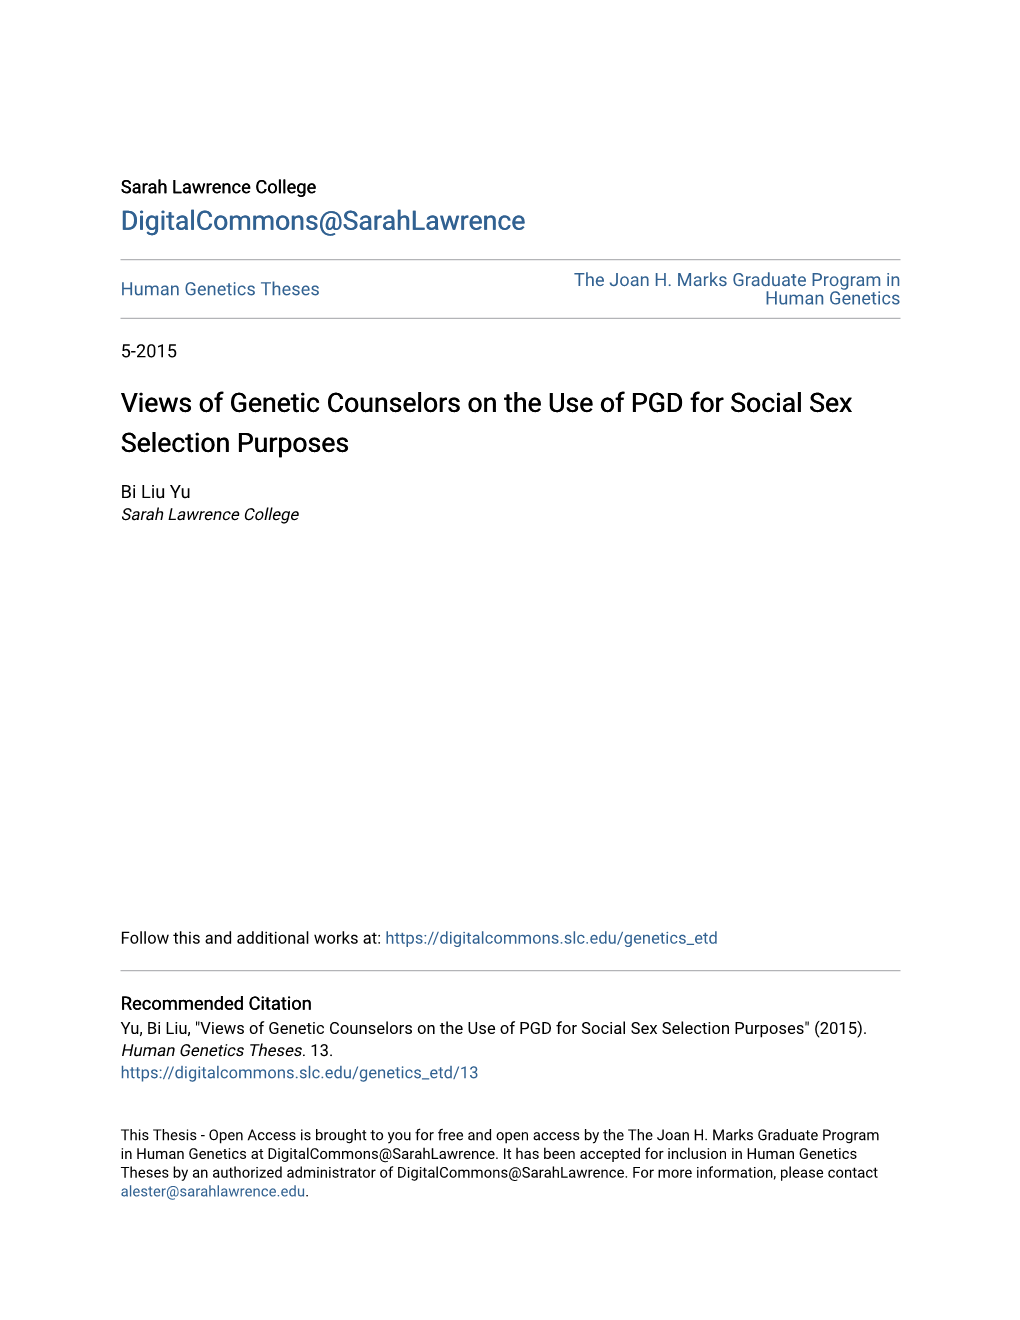 Views of Genetic Counselors on the Use of PGD for Social Sex Selection Purposes